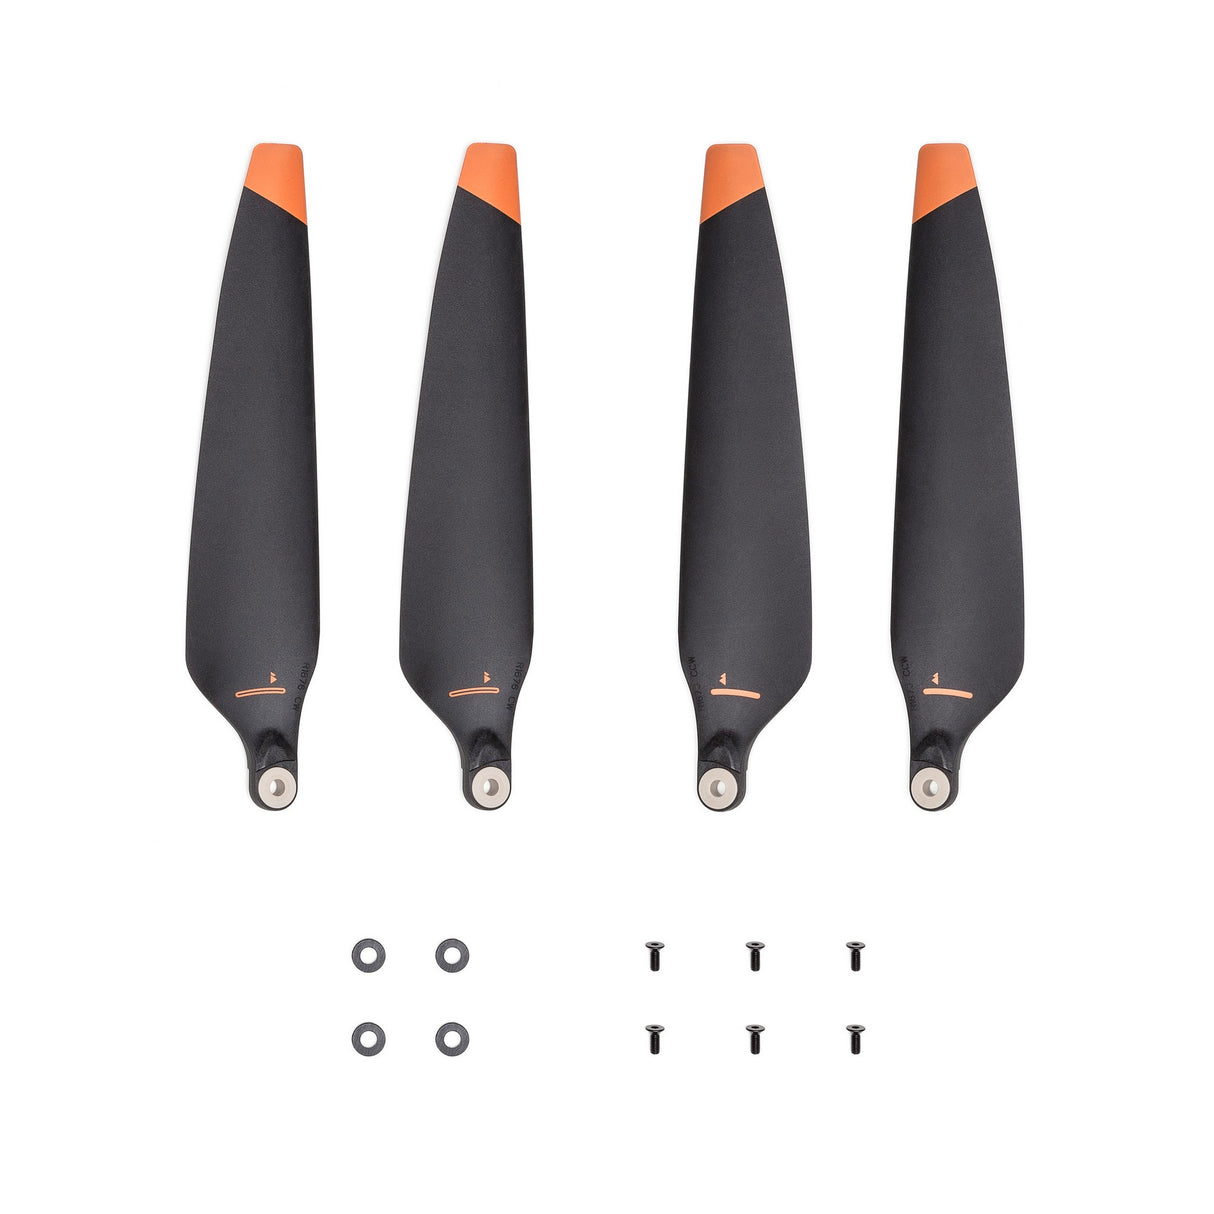 DJI 1676 High-altitude Propellers for Matrice 30 Series